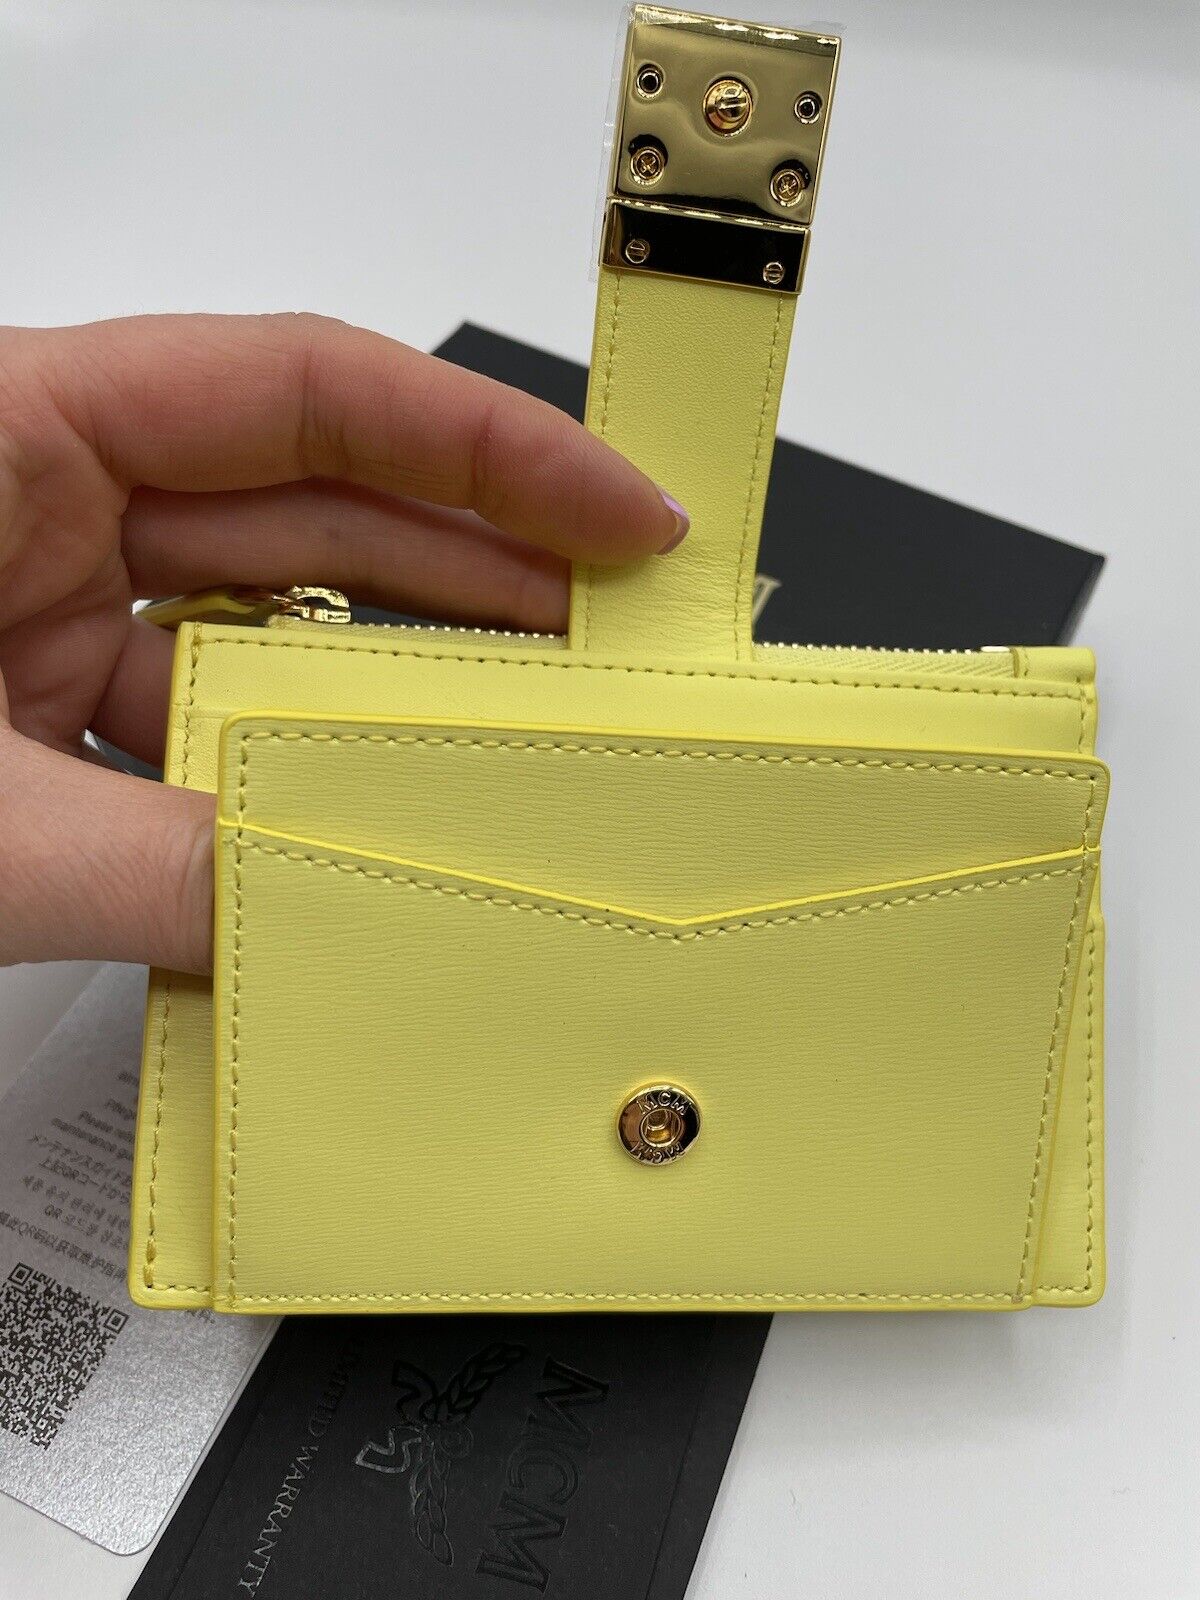 NWT MCM Patricia Zip Card Case, Wallet Yellow With Gold logo MSRP $335